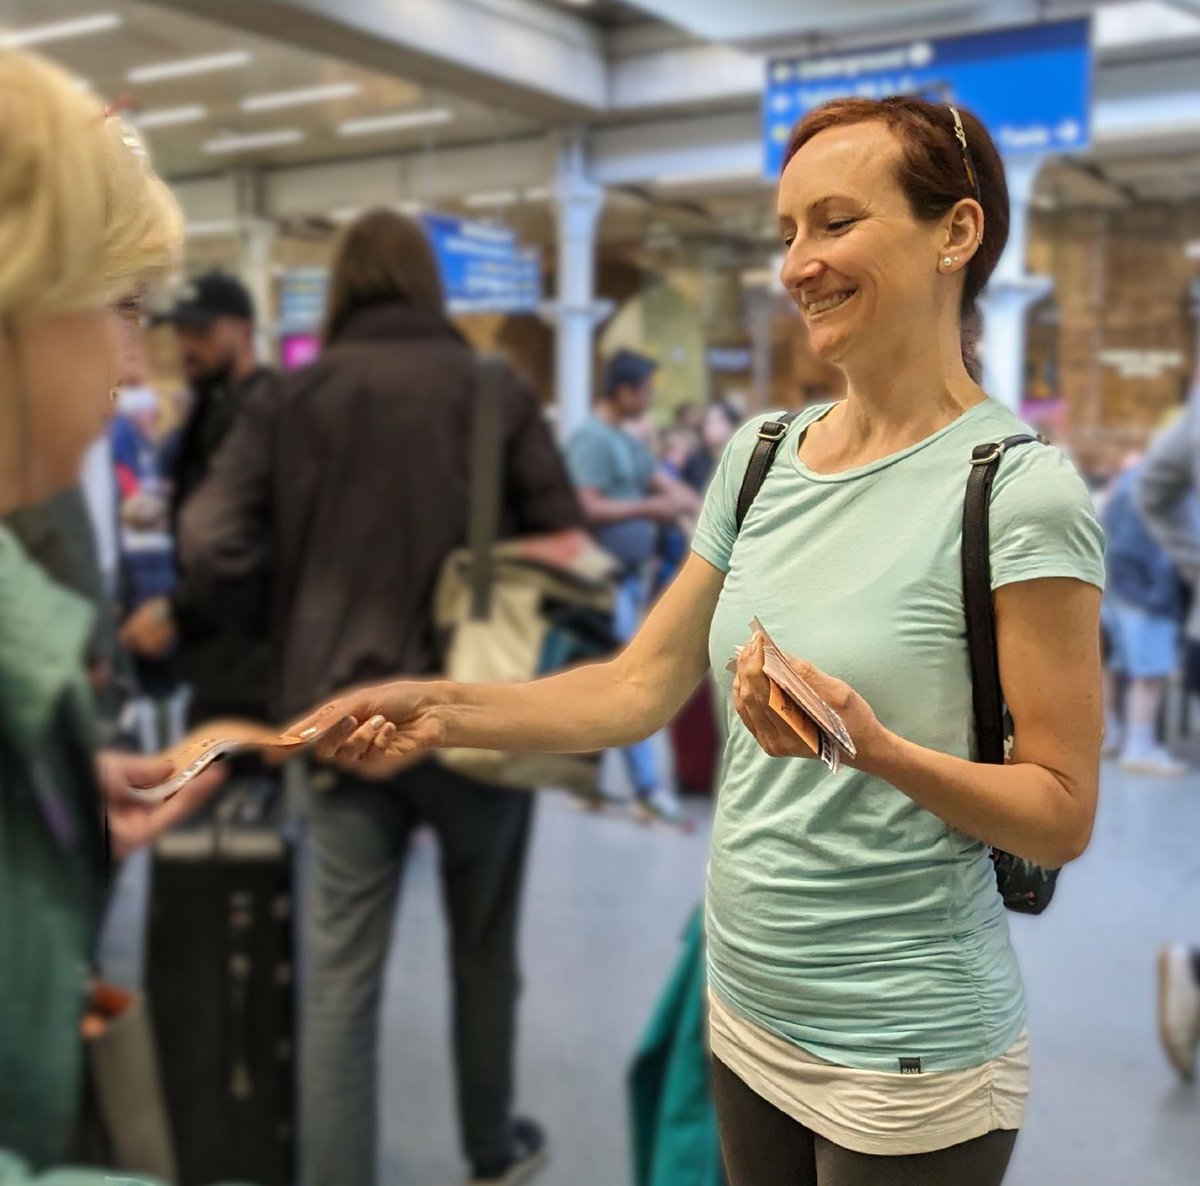 Yesterday we spent Bank Holiday afternoon at St Pancras, thanking people for not flying as they got off the Eurostar. Taking the train saves 96% on your emissions – from London to Paris and back is 108kg by air and just 4kg by rail 🚄 #TrainsNotPlanes